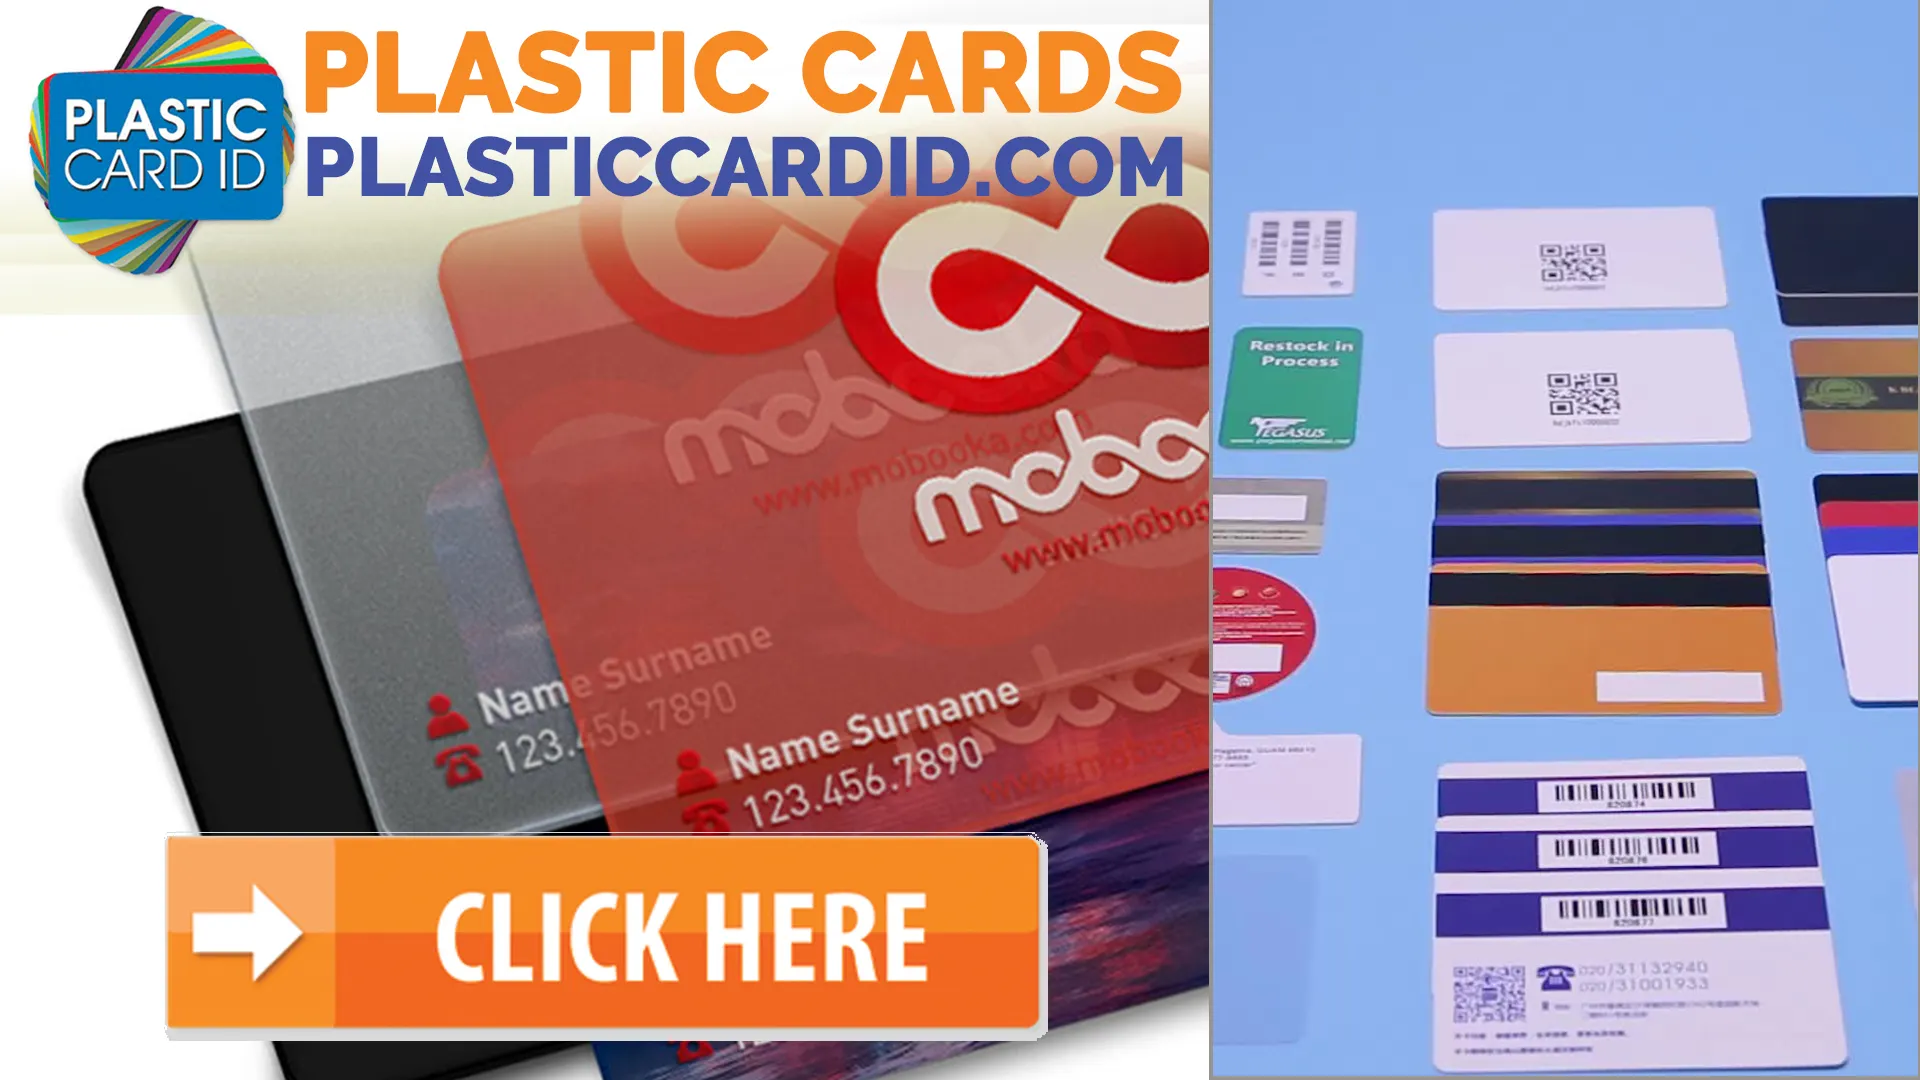 Understanding the Cultural Significance of Plastic Cards